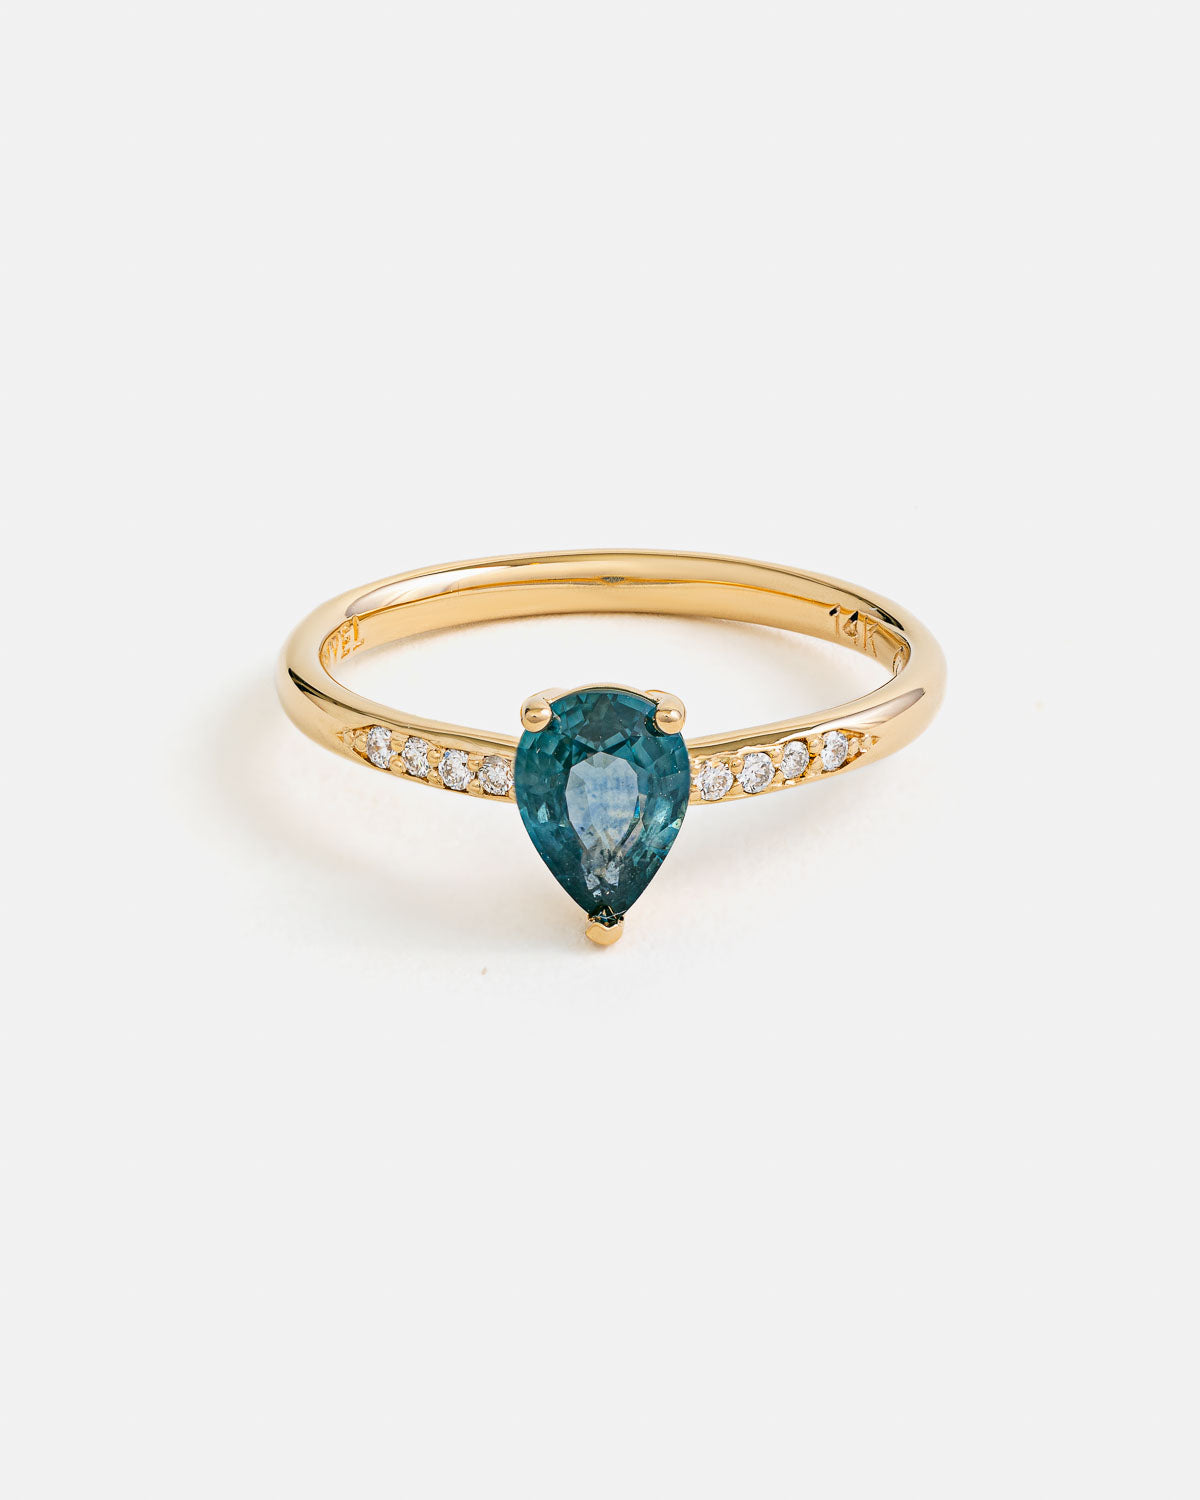 Pira Ring in 14k Fairmined Yellow Gold with Australian Sapphire and lab grown Diamonds